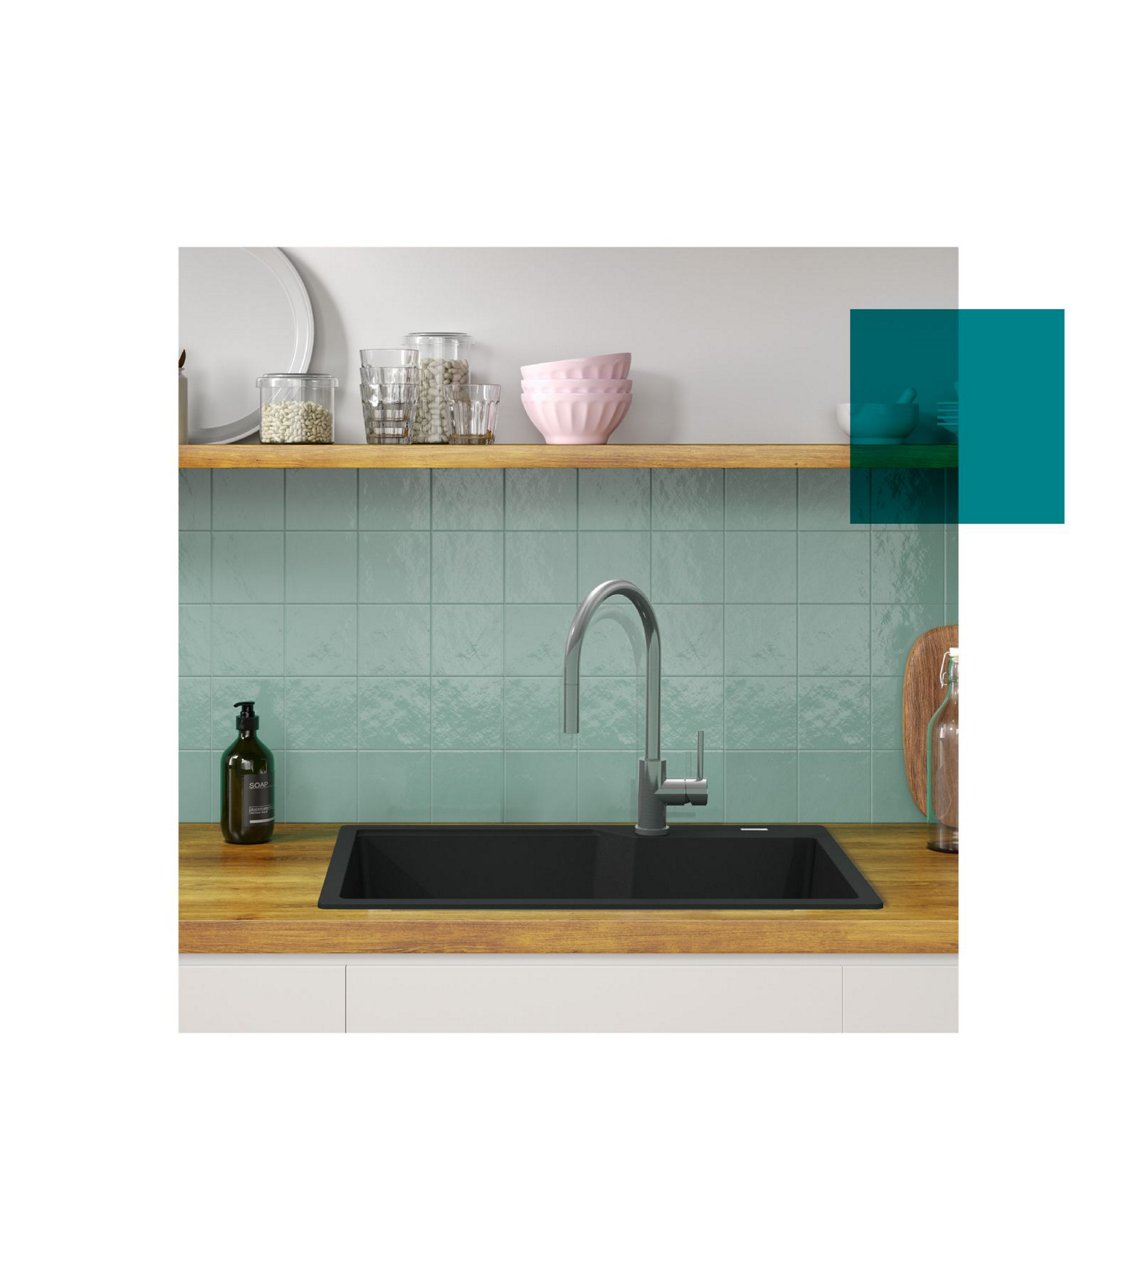 Kindred matte black granite sink and chrome faucet in kitchen with butcher block counter tops, open shelving and a teal tile blackspash